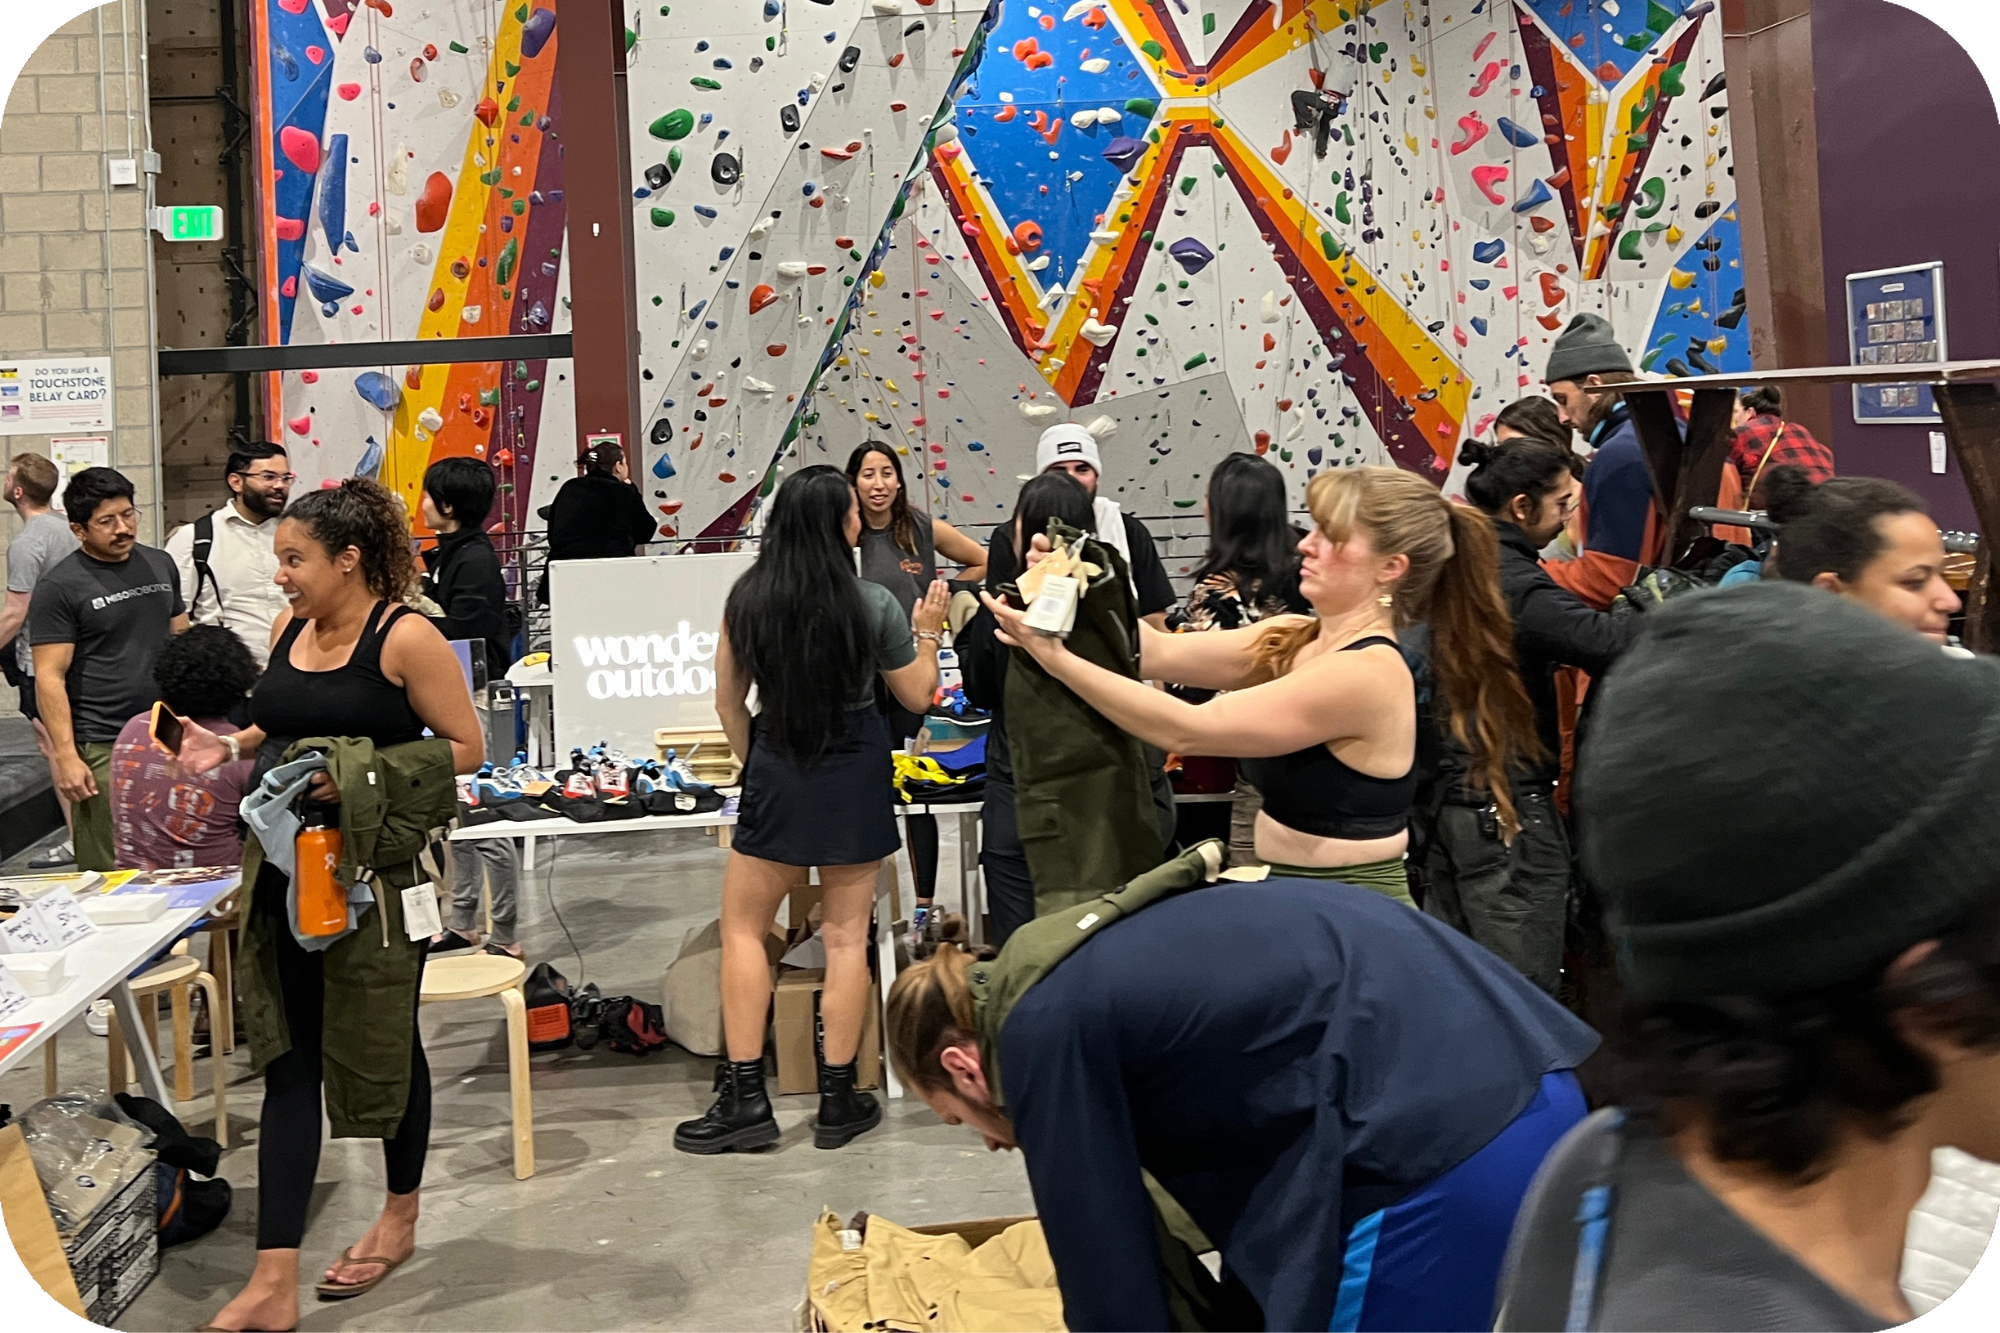 Men and women gathering at climbing gym for garage and bake sale event